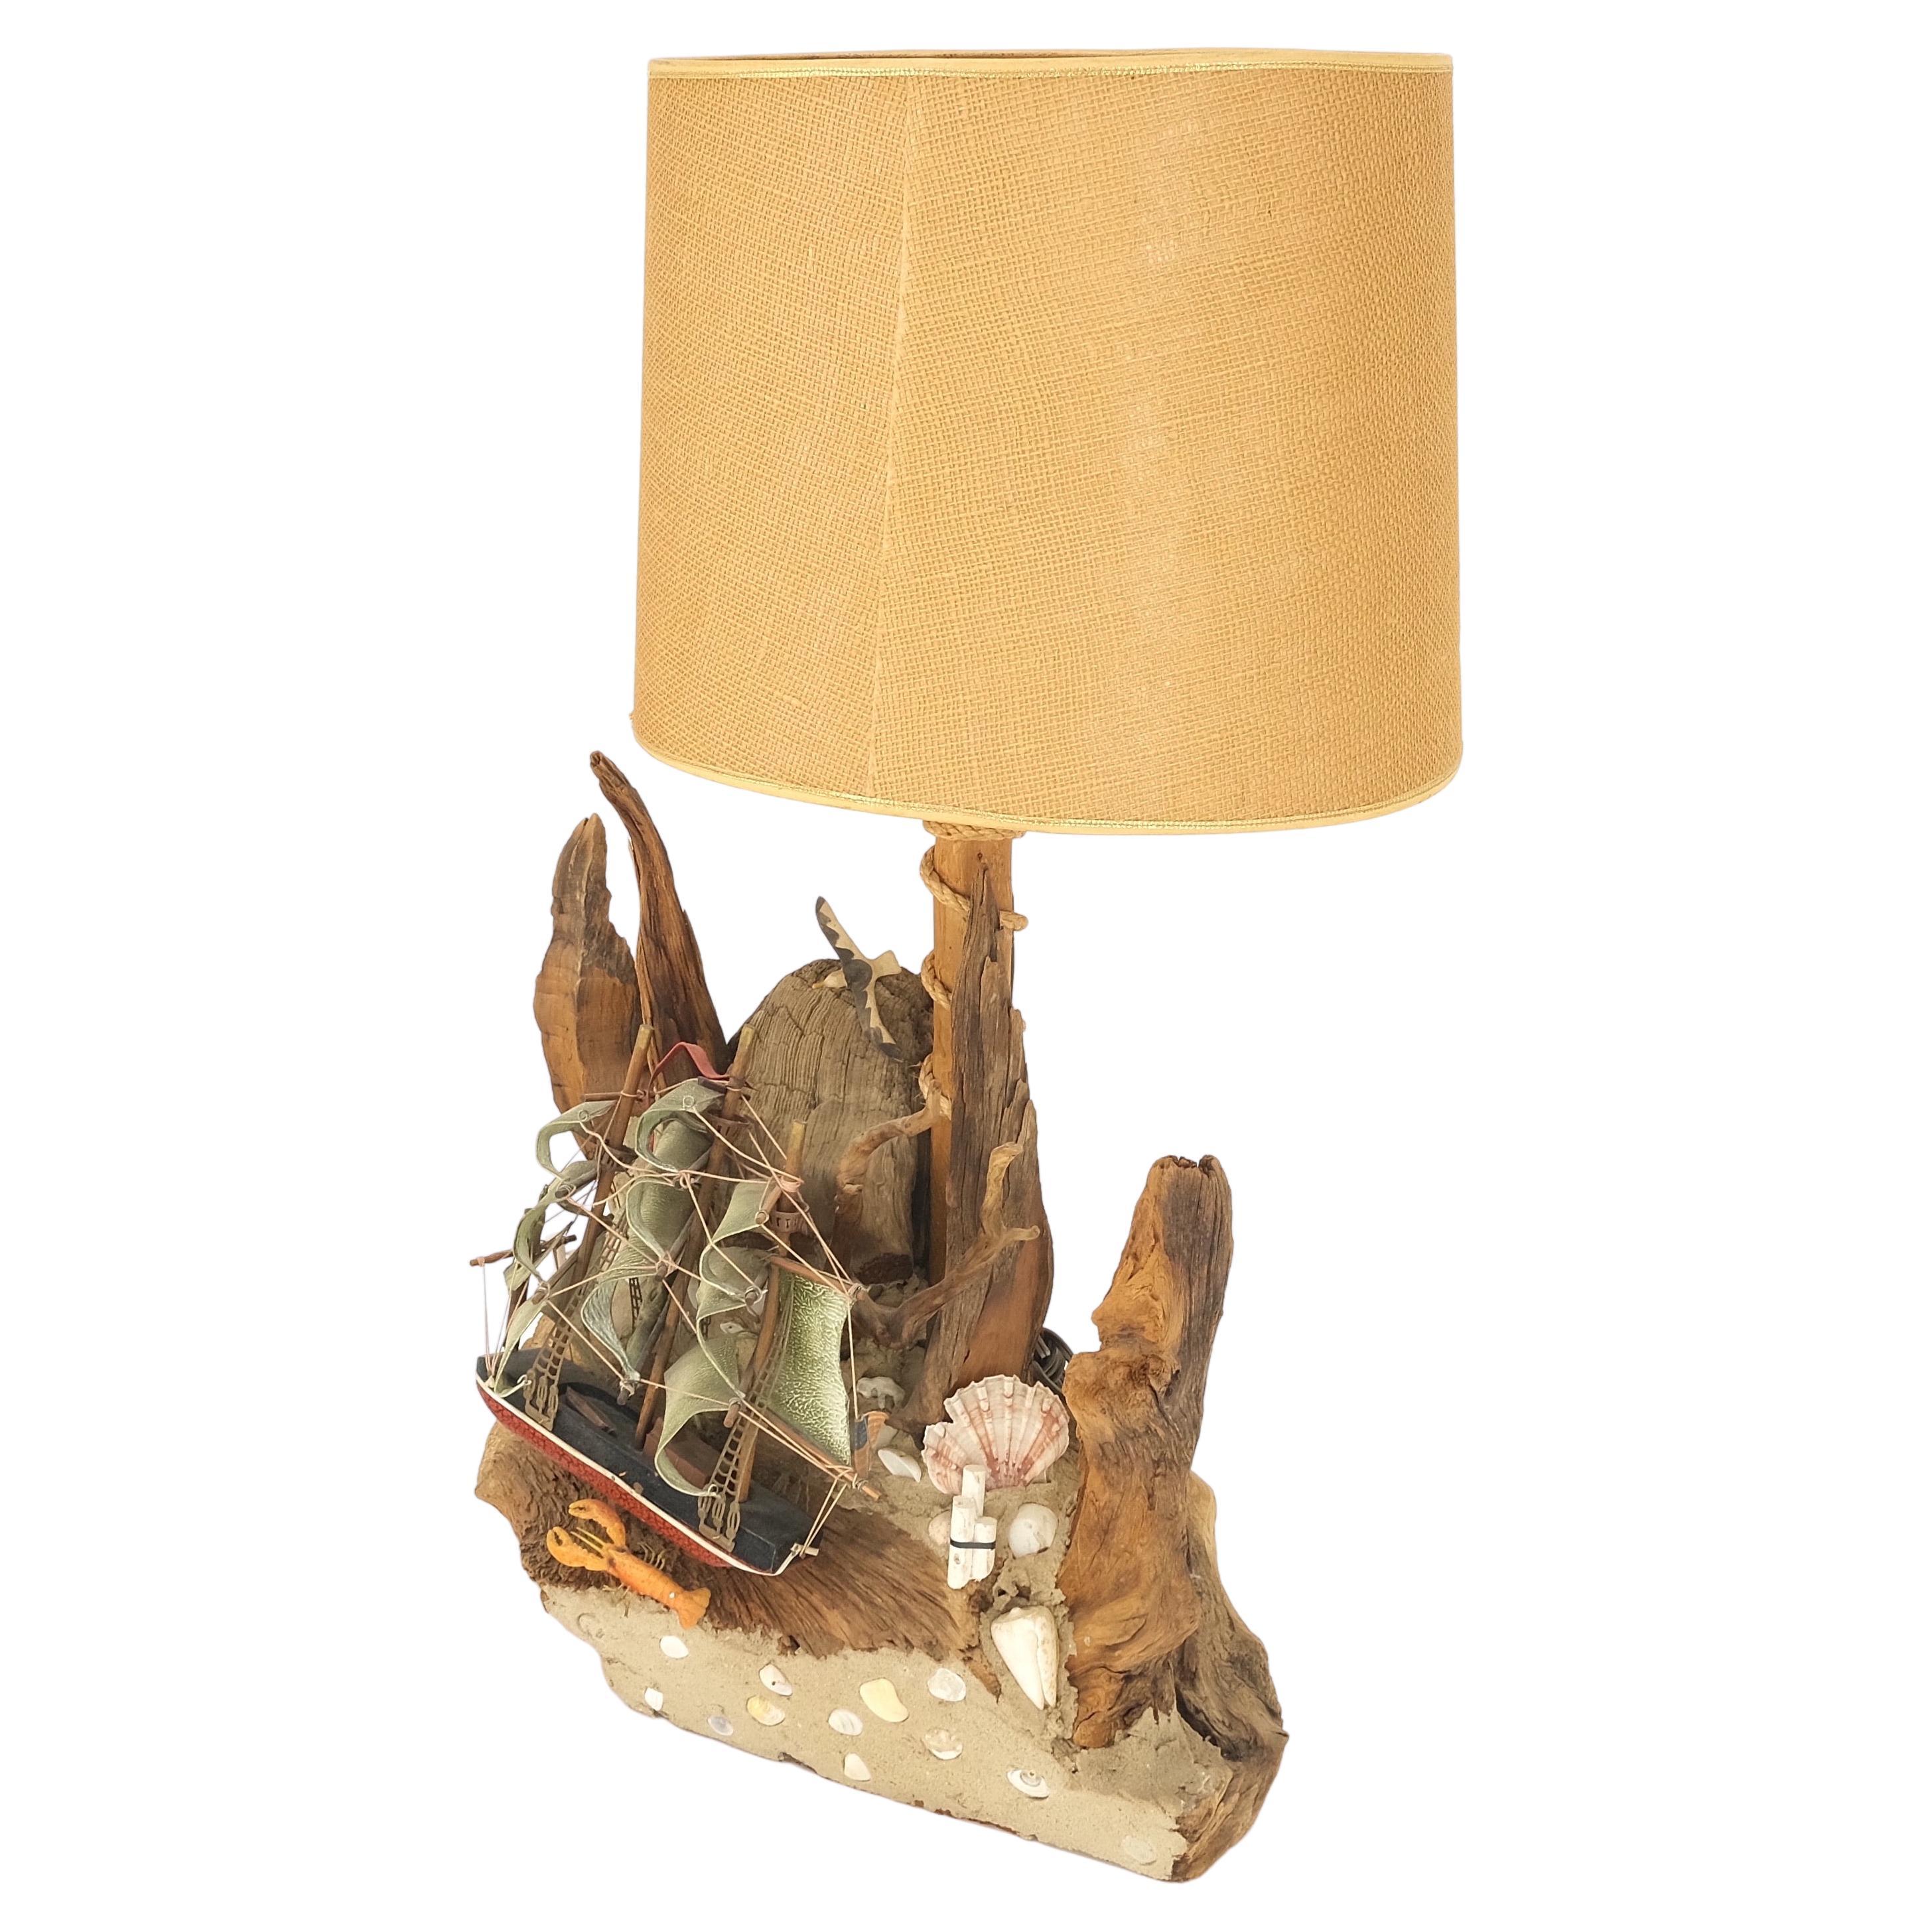 Sea Naval Shells Theme Decorated Driftwood Base Table Lamp Mid-Century Modern For Sale